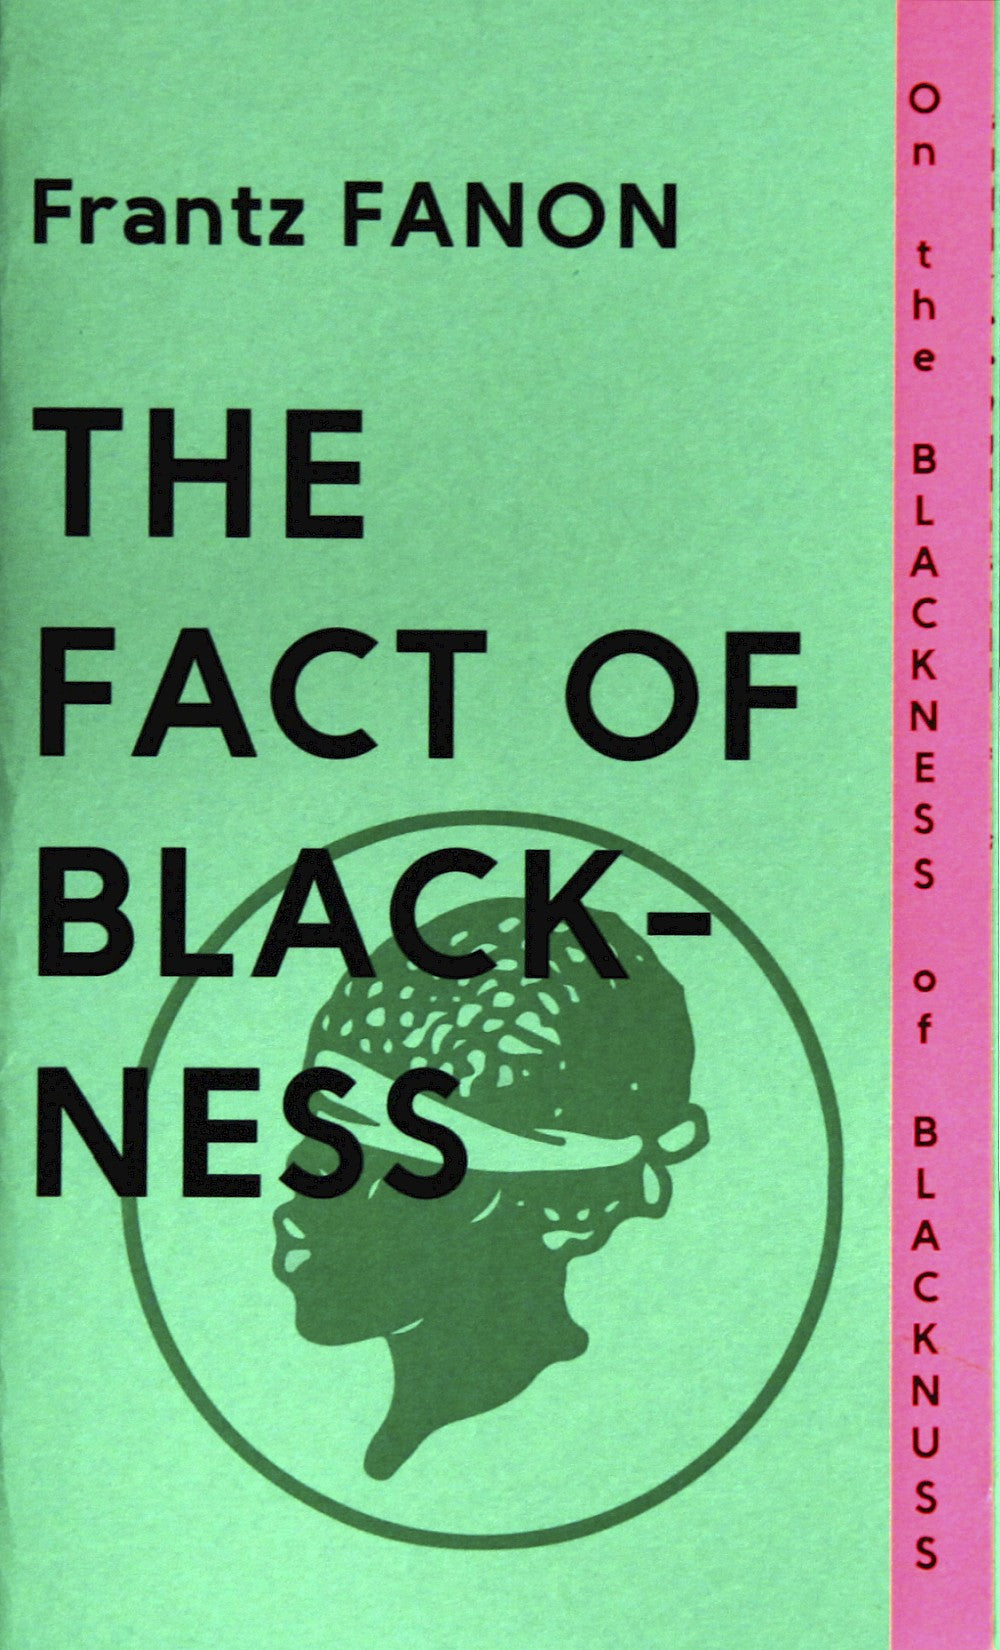 The Fact of Blackness